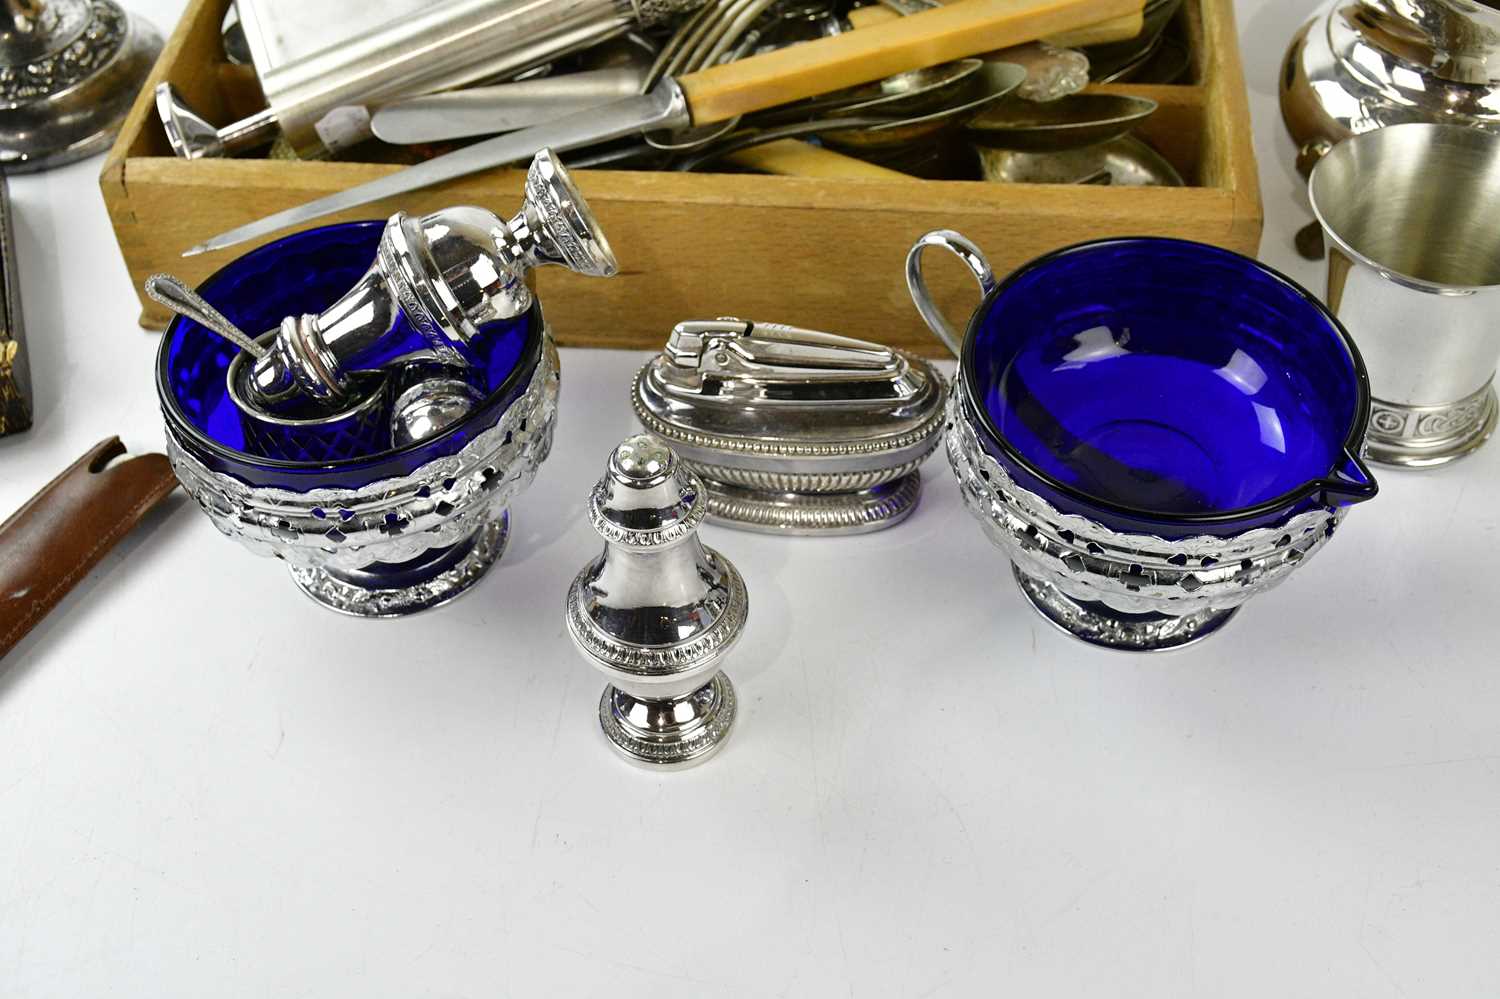 A small quantity of assorted plated items including cutlery, vases, etc. - Image 2 of 4